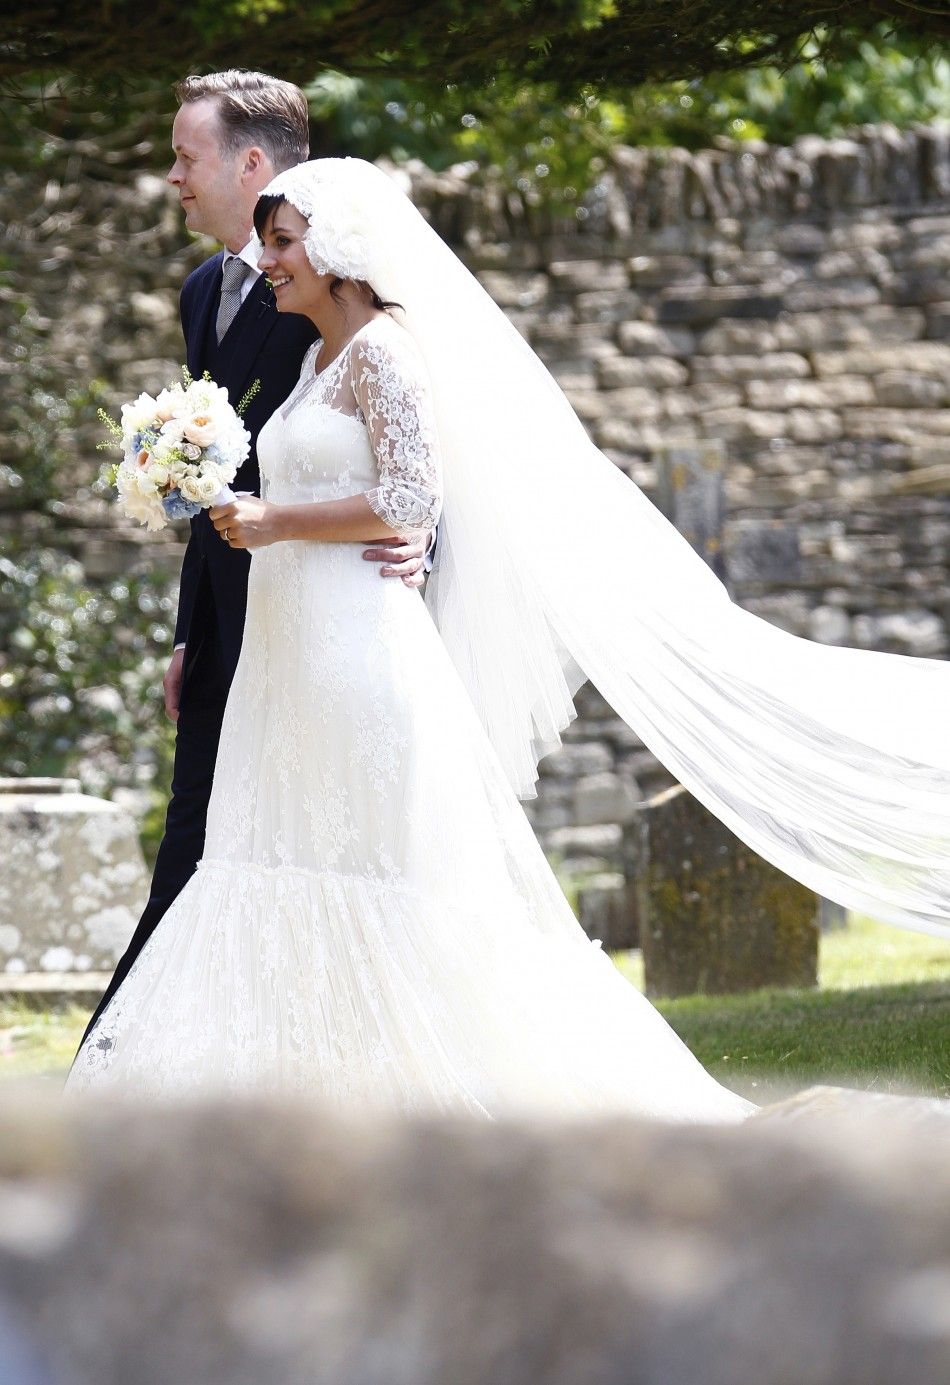 British singer Lily Allen R smiles after marrying Sam Cooper as the couple leaves St James the Great Church in Cranham, Goucestershire, western England, June 11, 2011.